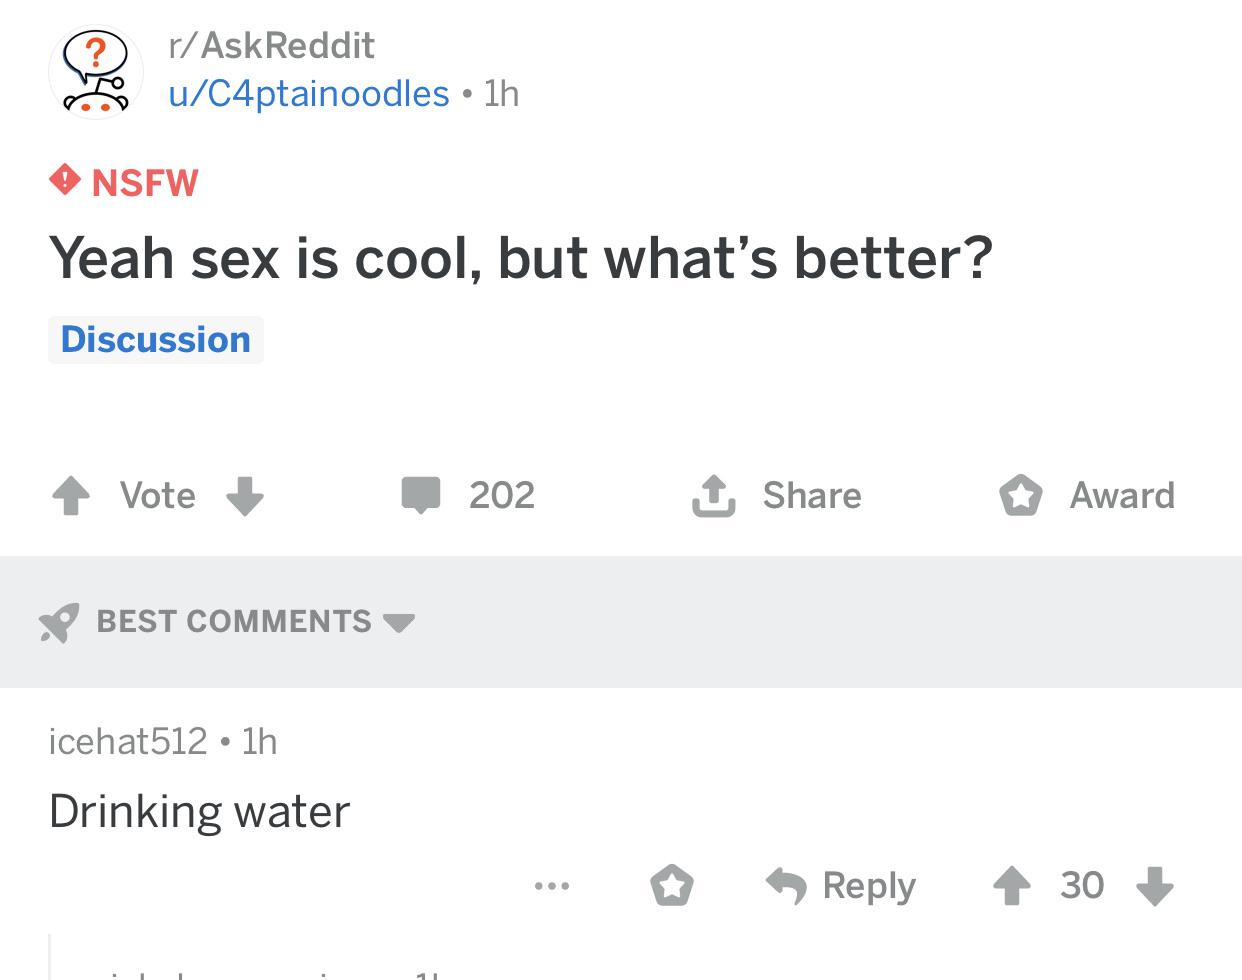 thanos water-memes thanos text: ('ON) r/AskReddit u/C4ptainoodles • lh NSFW Yeah sex is cool, but what's better? Discussion 202 BEST COMMENTS icehat512 • lh Drinking water Share Reply O Award 30 